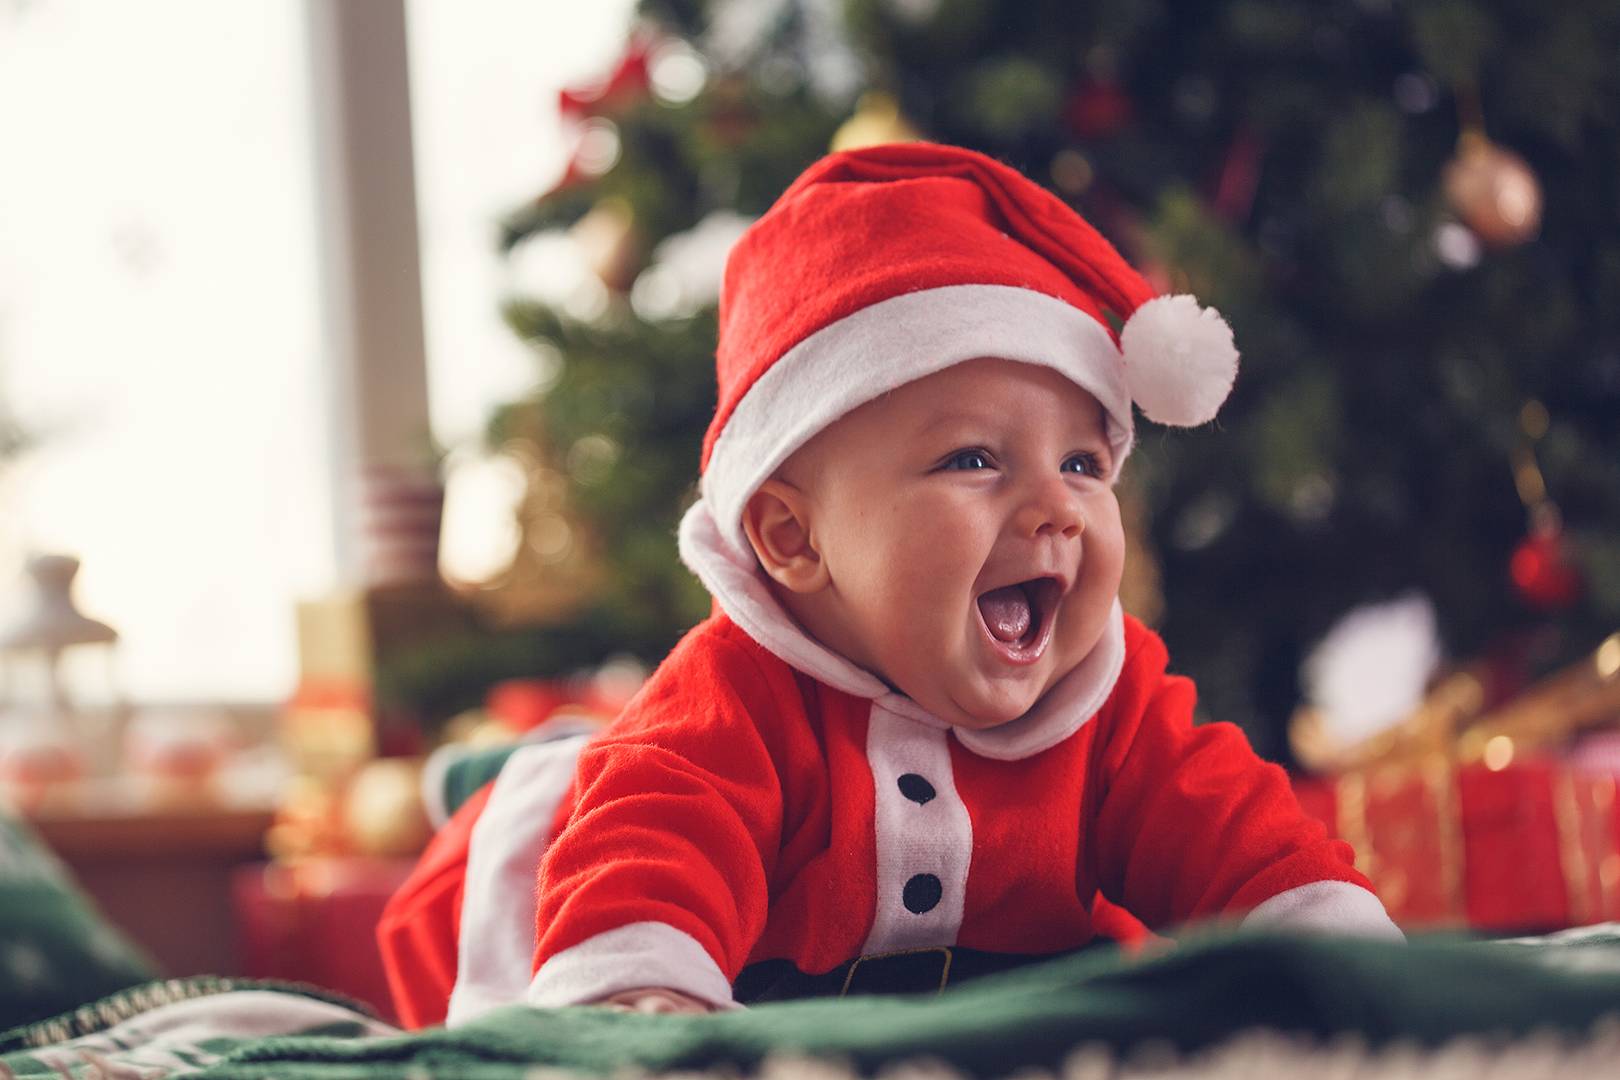 baby christmas glamour 13dec17 istock 621688754 l | Stay at Home Mum.com.au